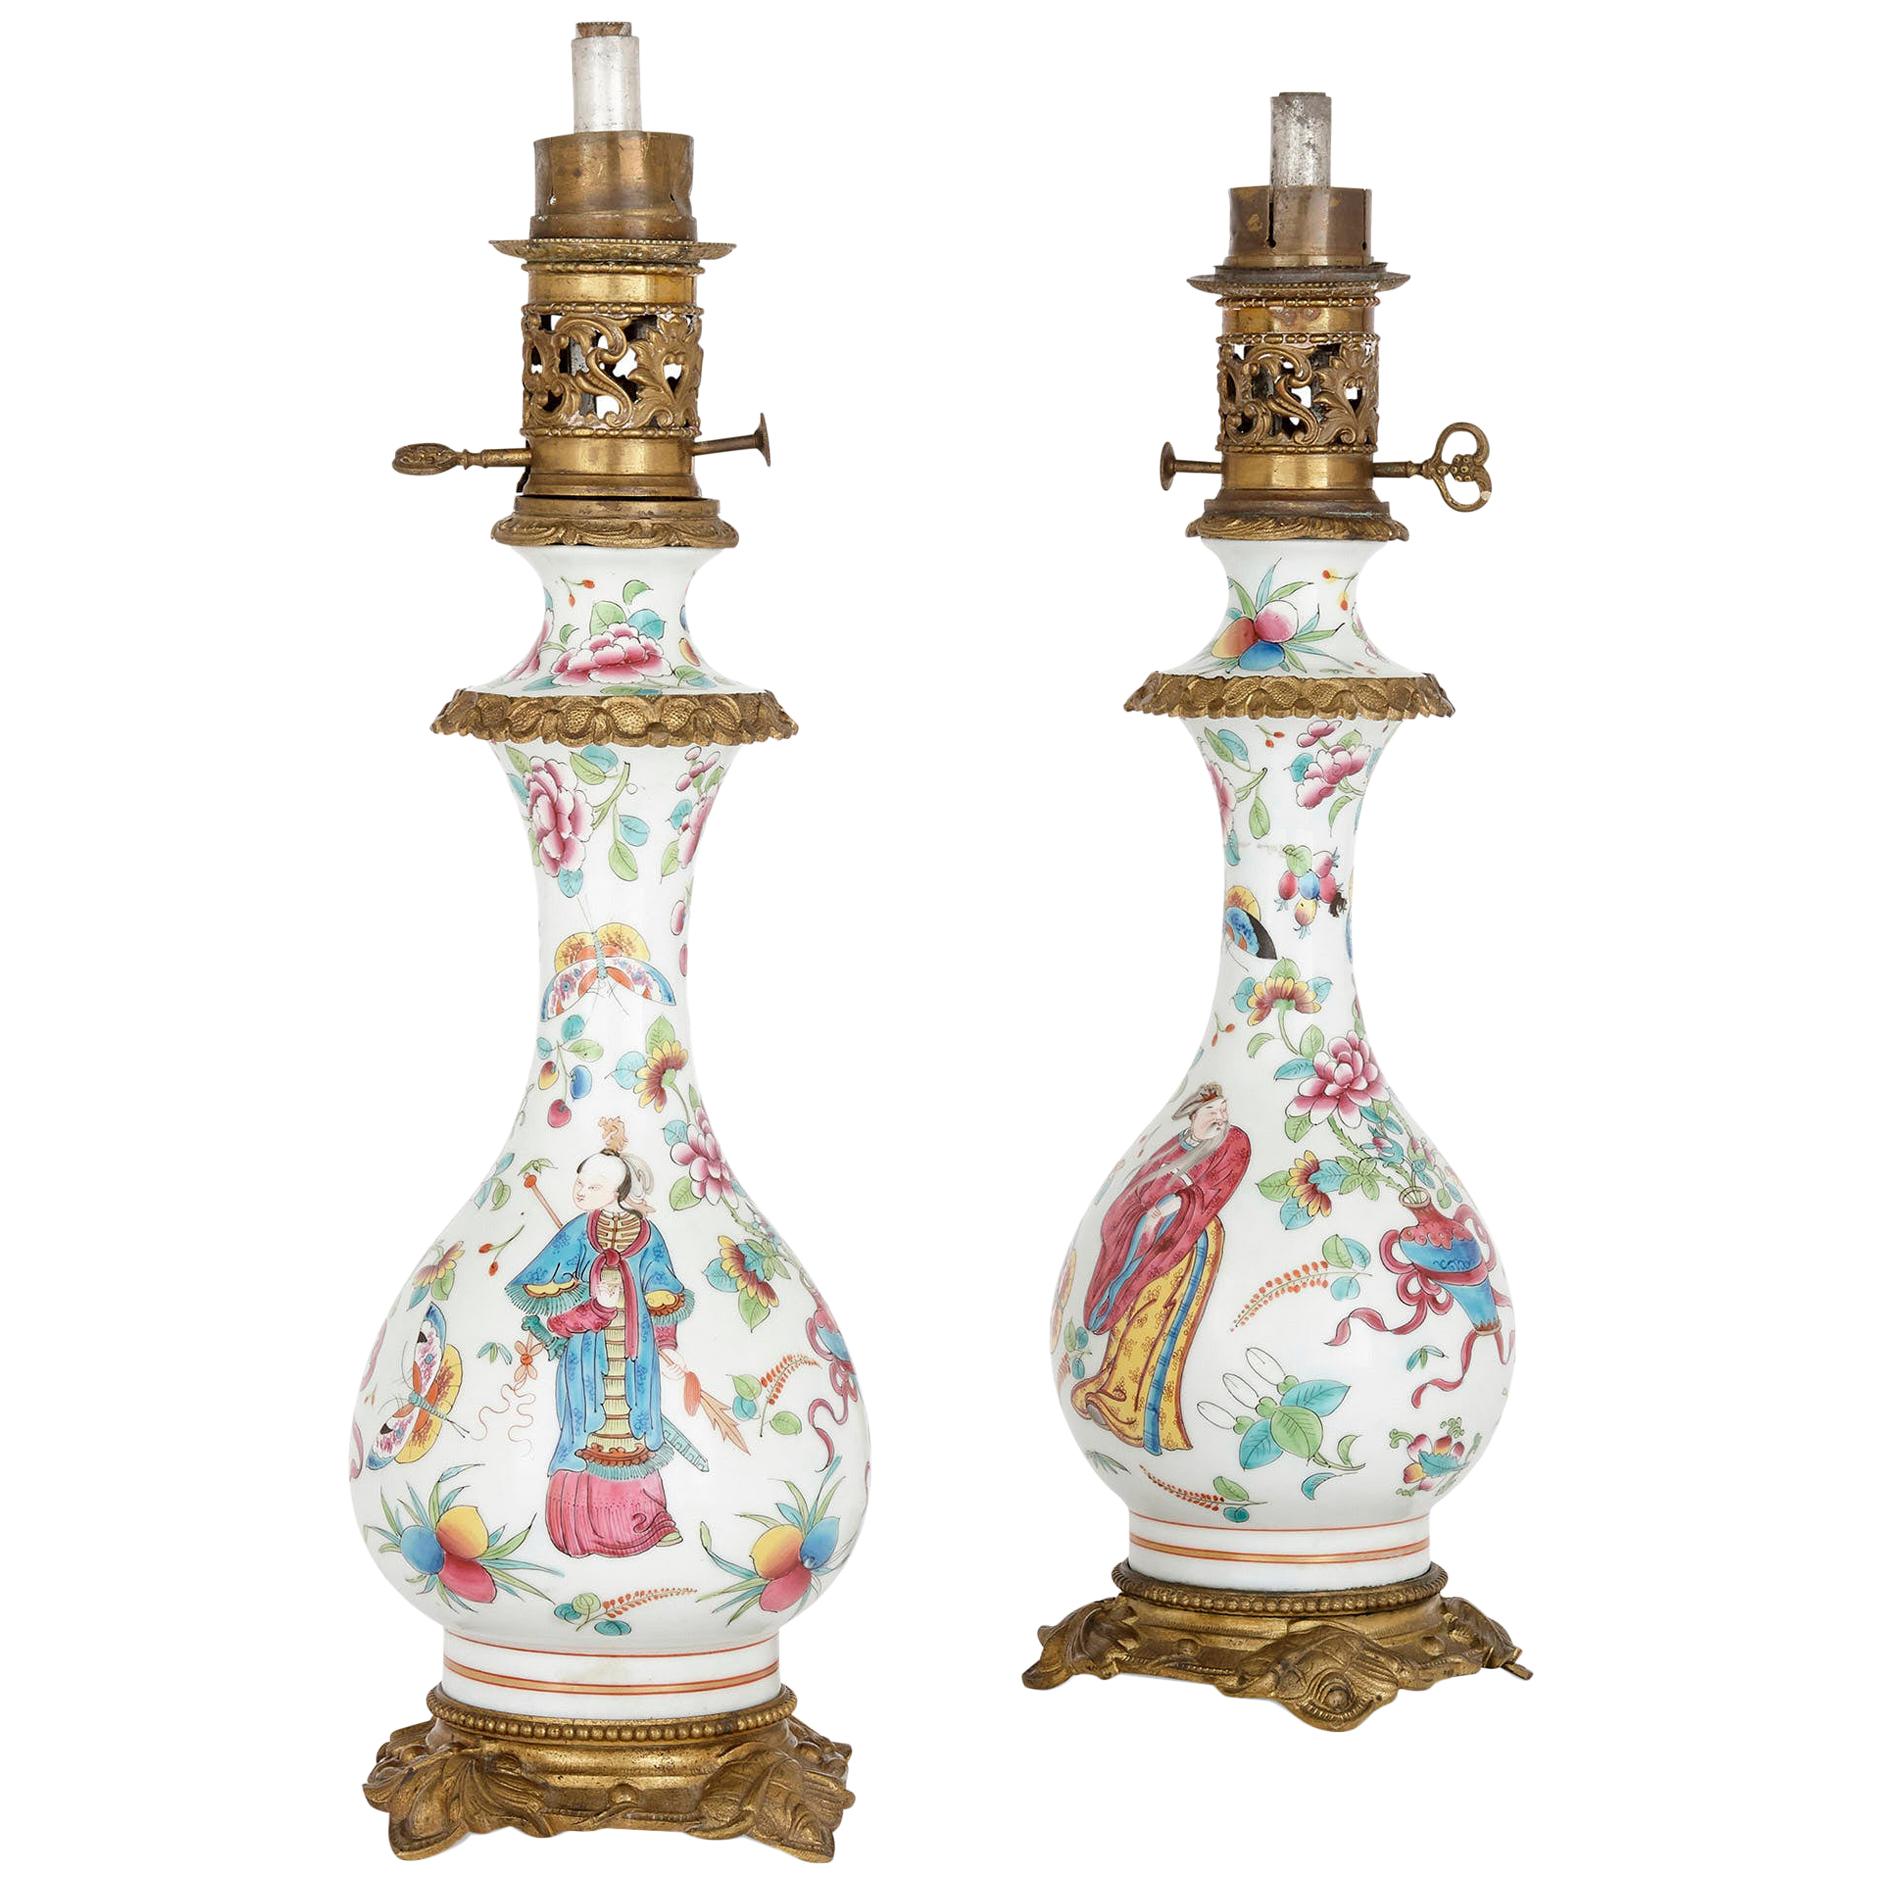 Pair of French Chinoiserie Style Gilt Bronze Mounted Porcelain Oil Lamps